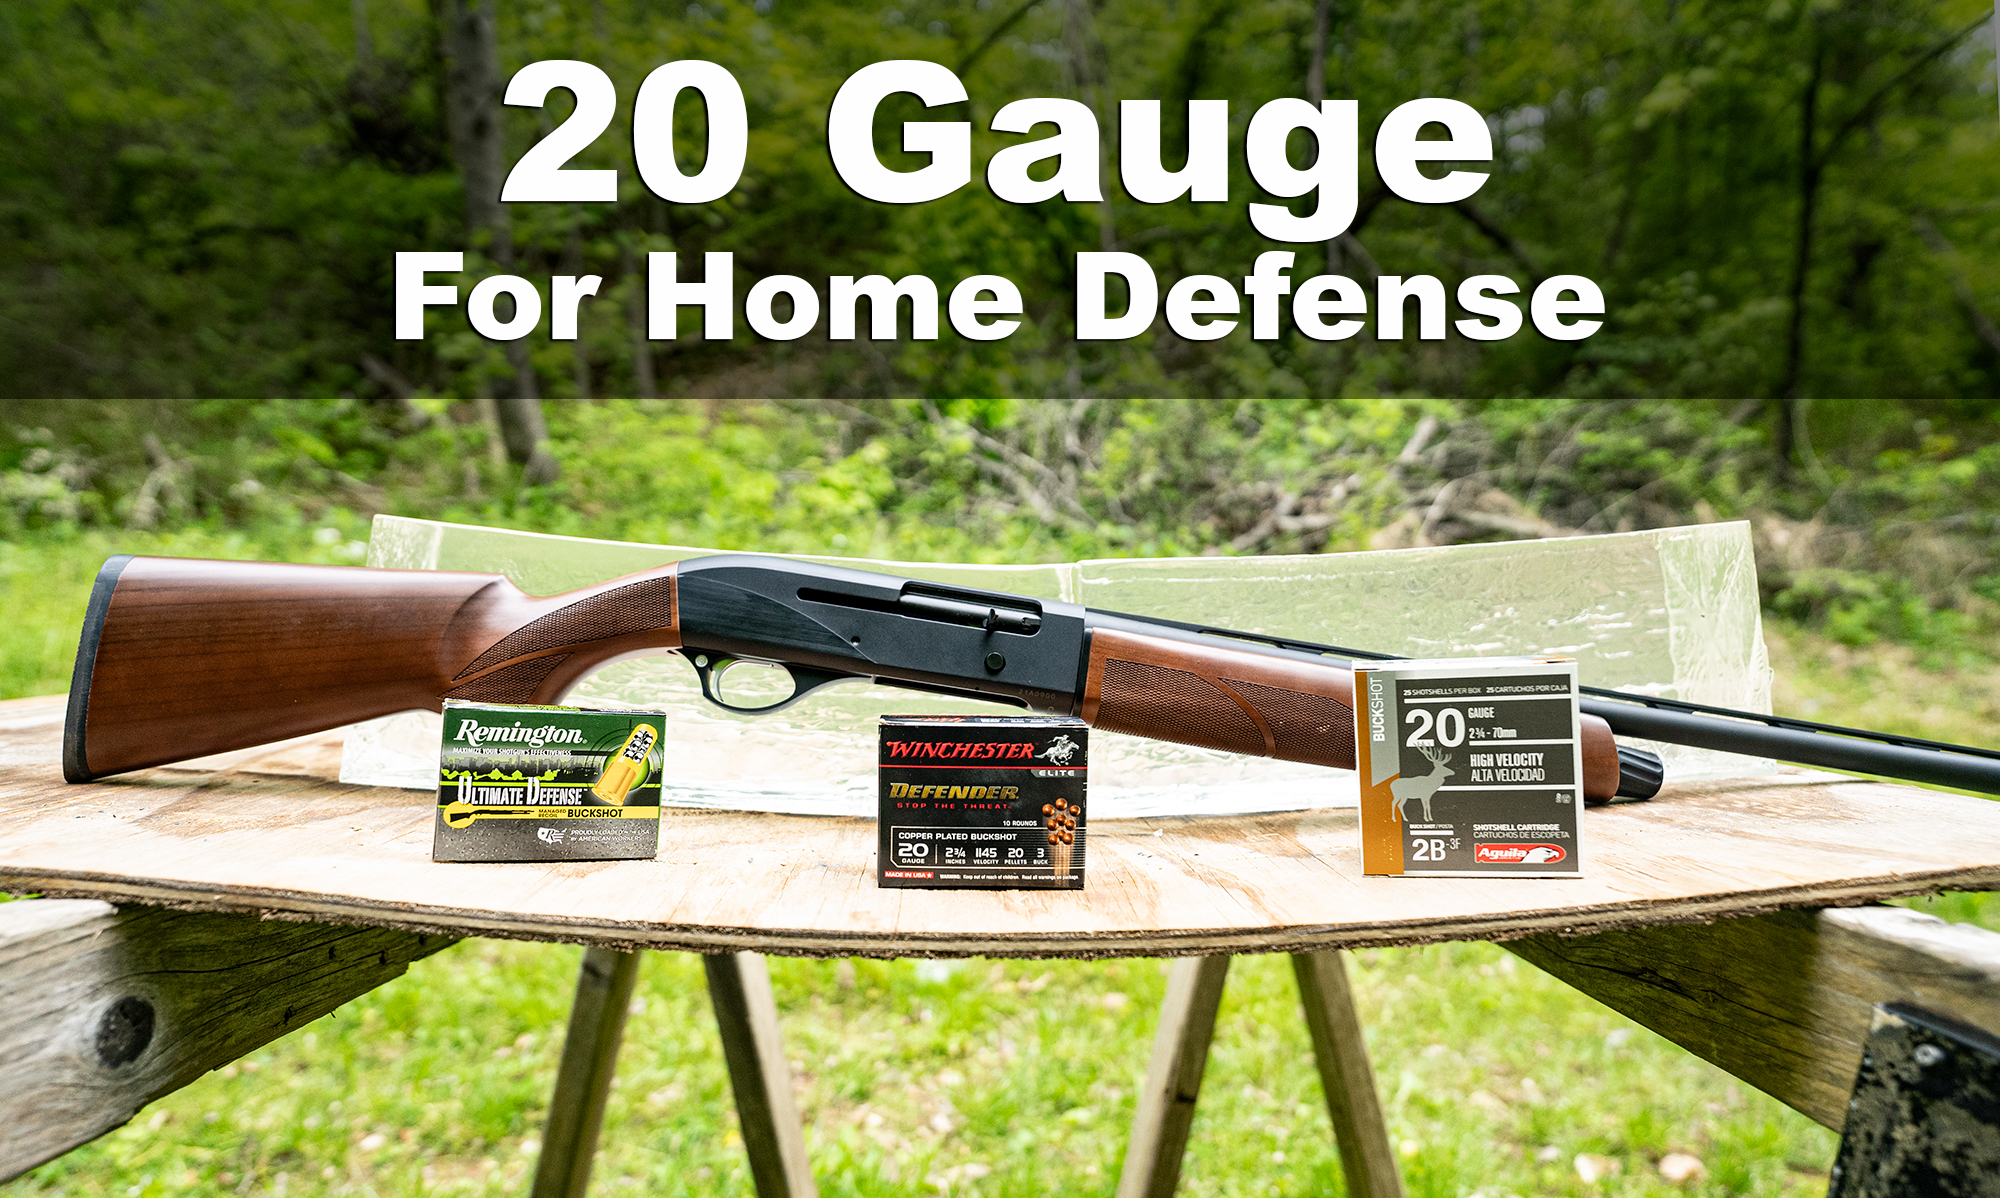 20 gauge for home defense at the range with ammunition